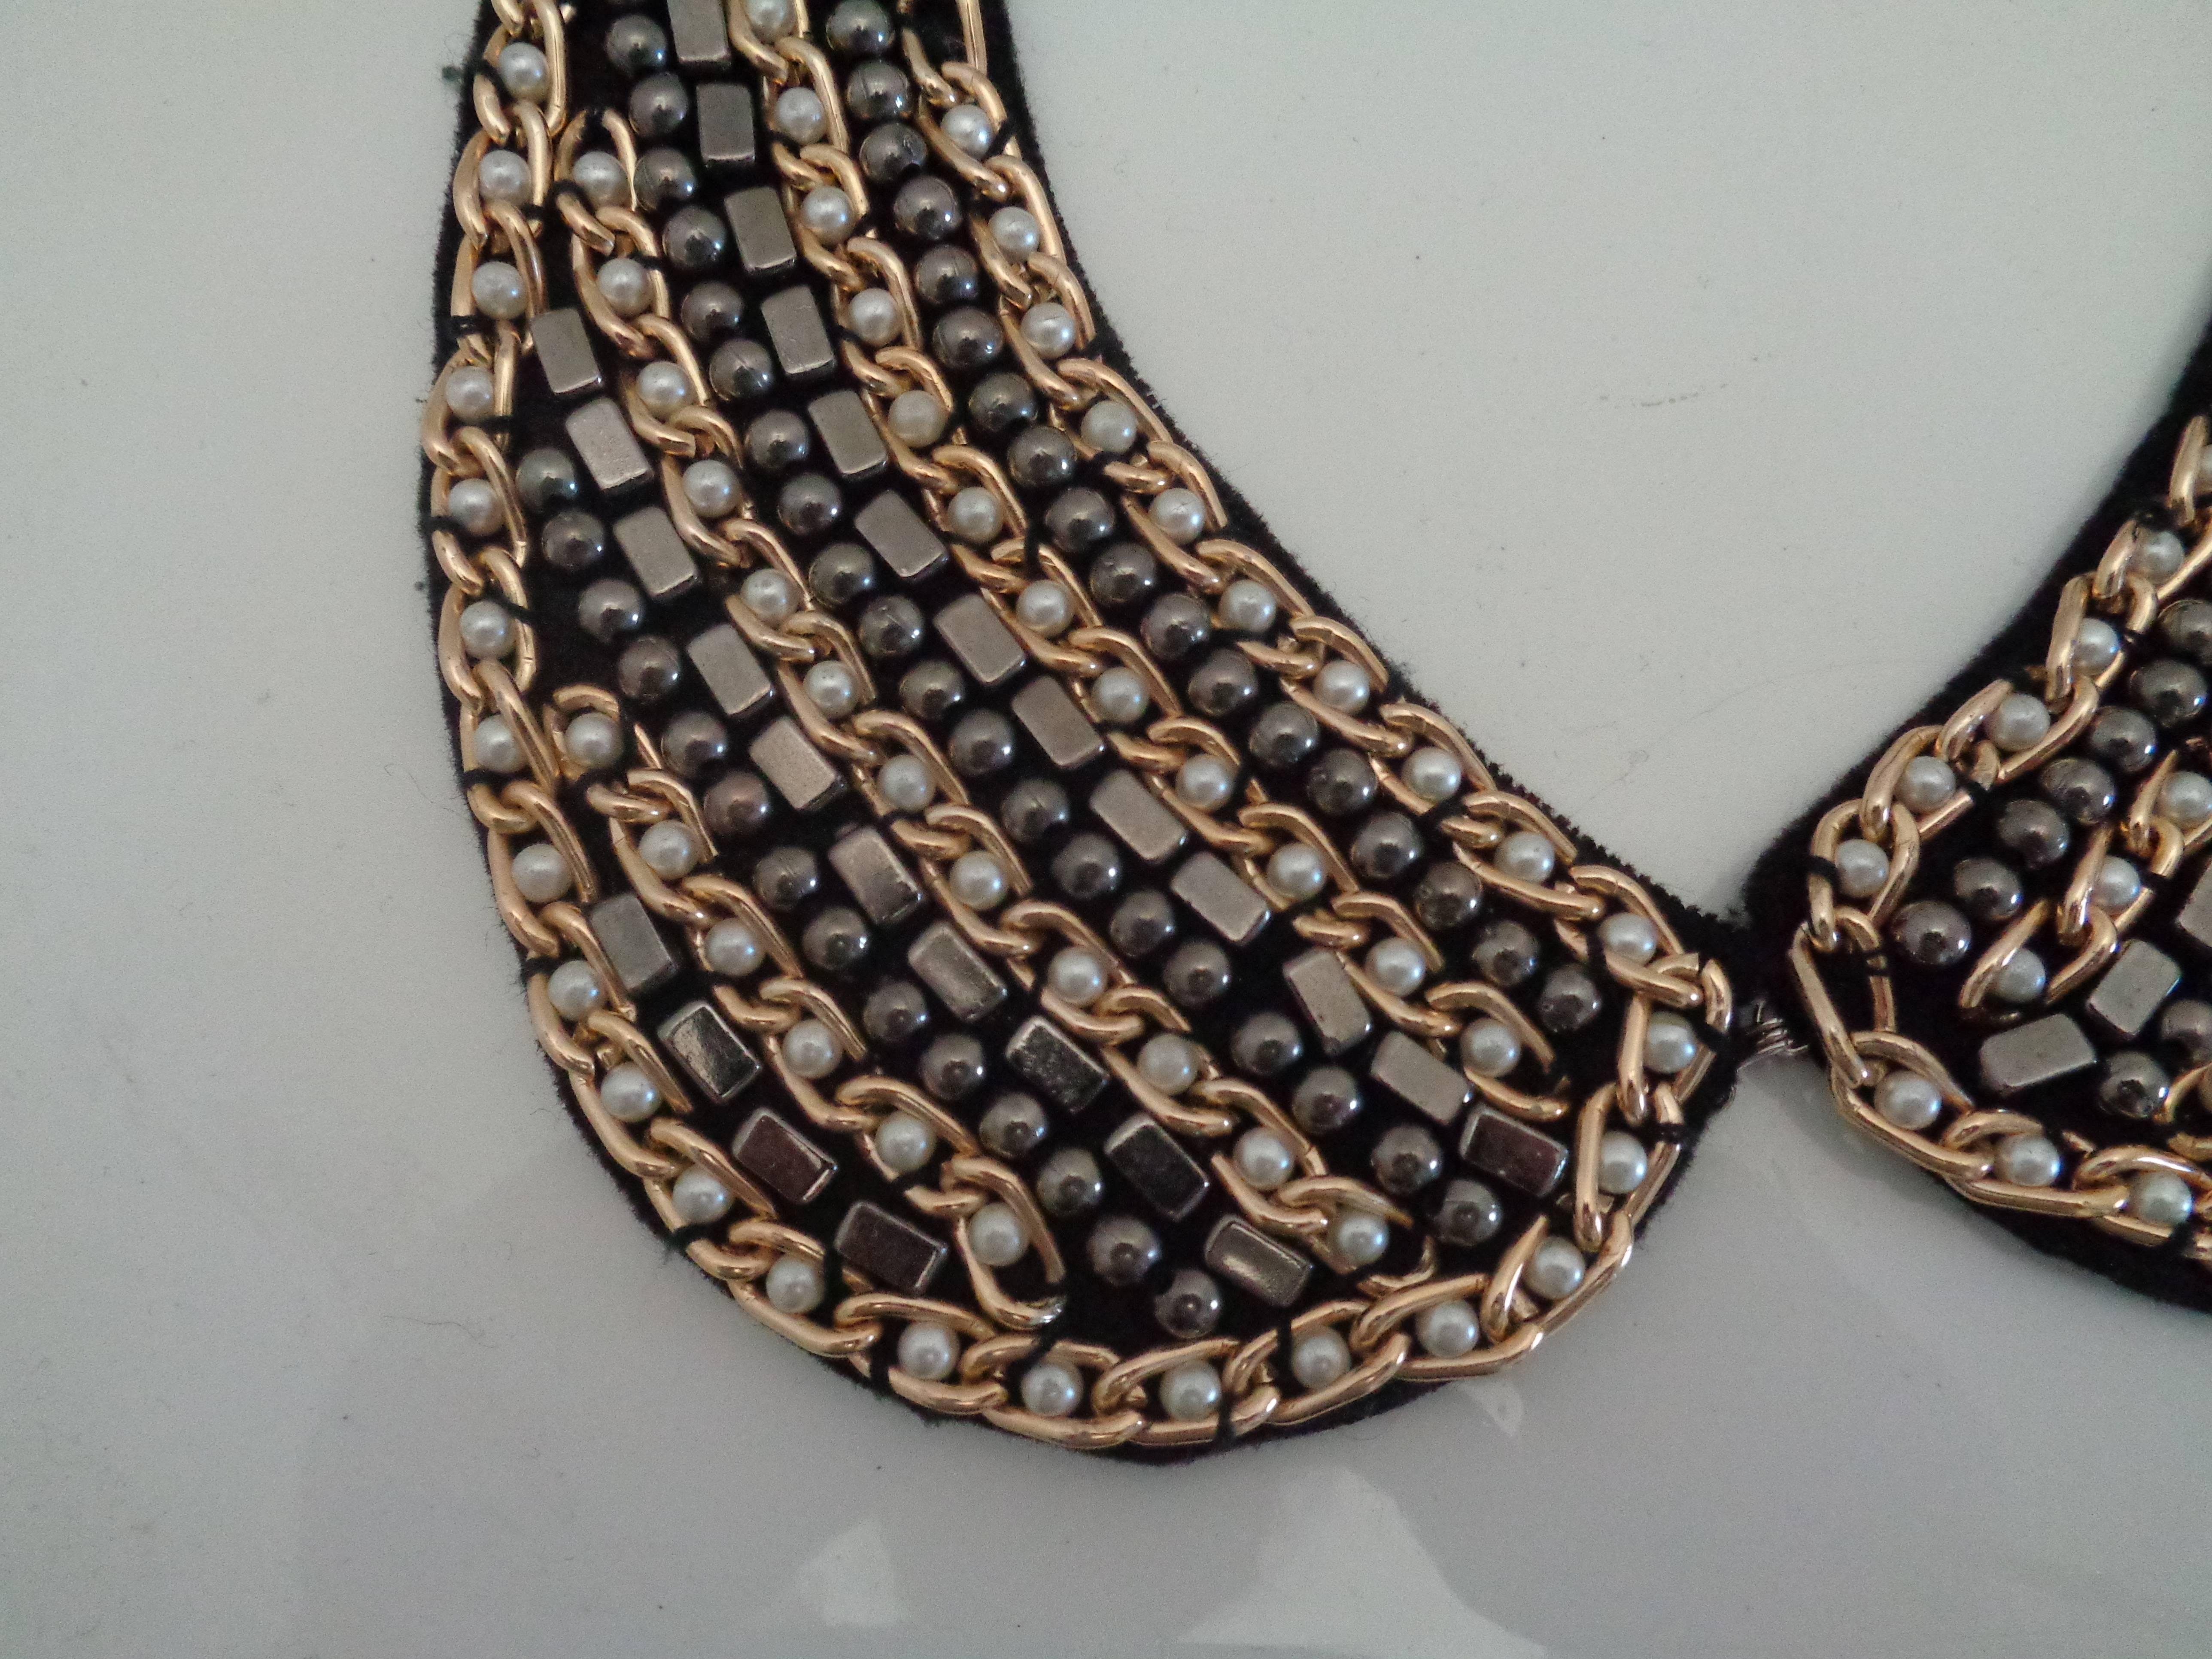 1980s Black Gold tone with Faux white and Grey pearls necklace necking
total lenght 44 cm